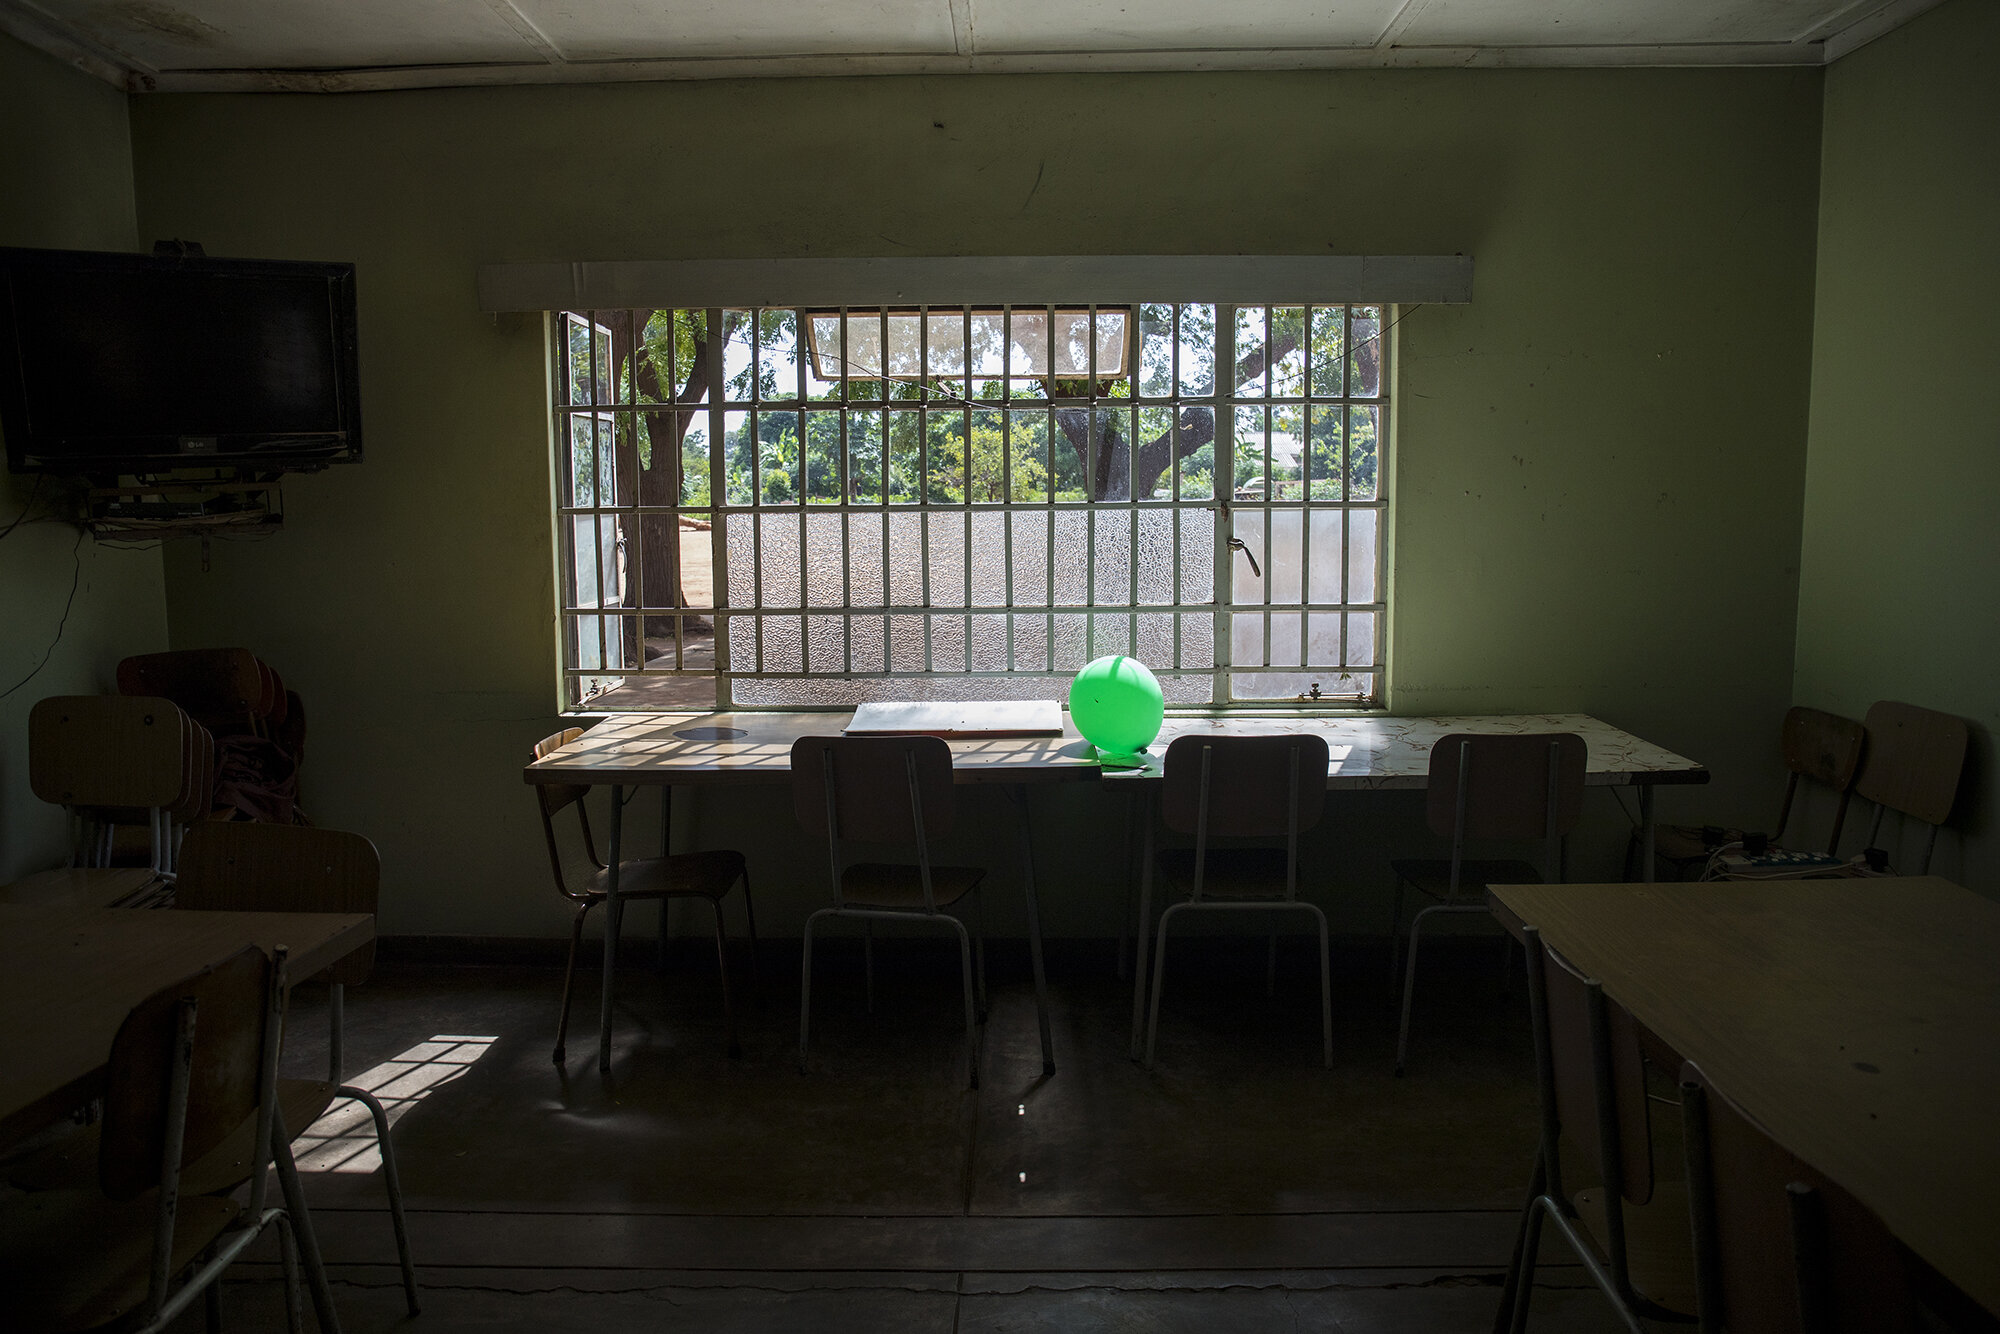  A balloon sits on a table inside the old age home cafeteria after Easter weekend.   